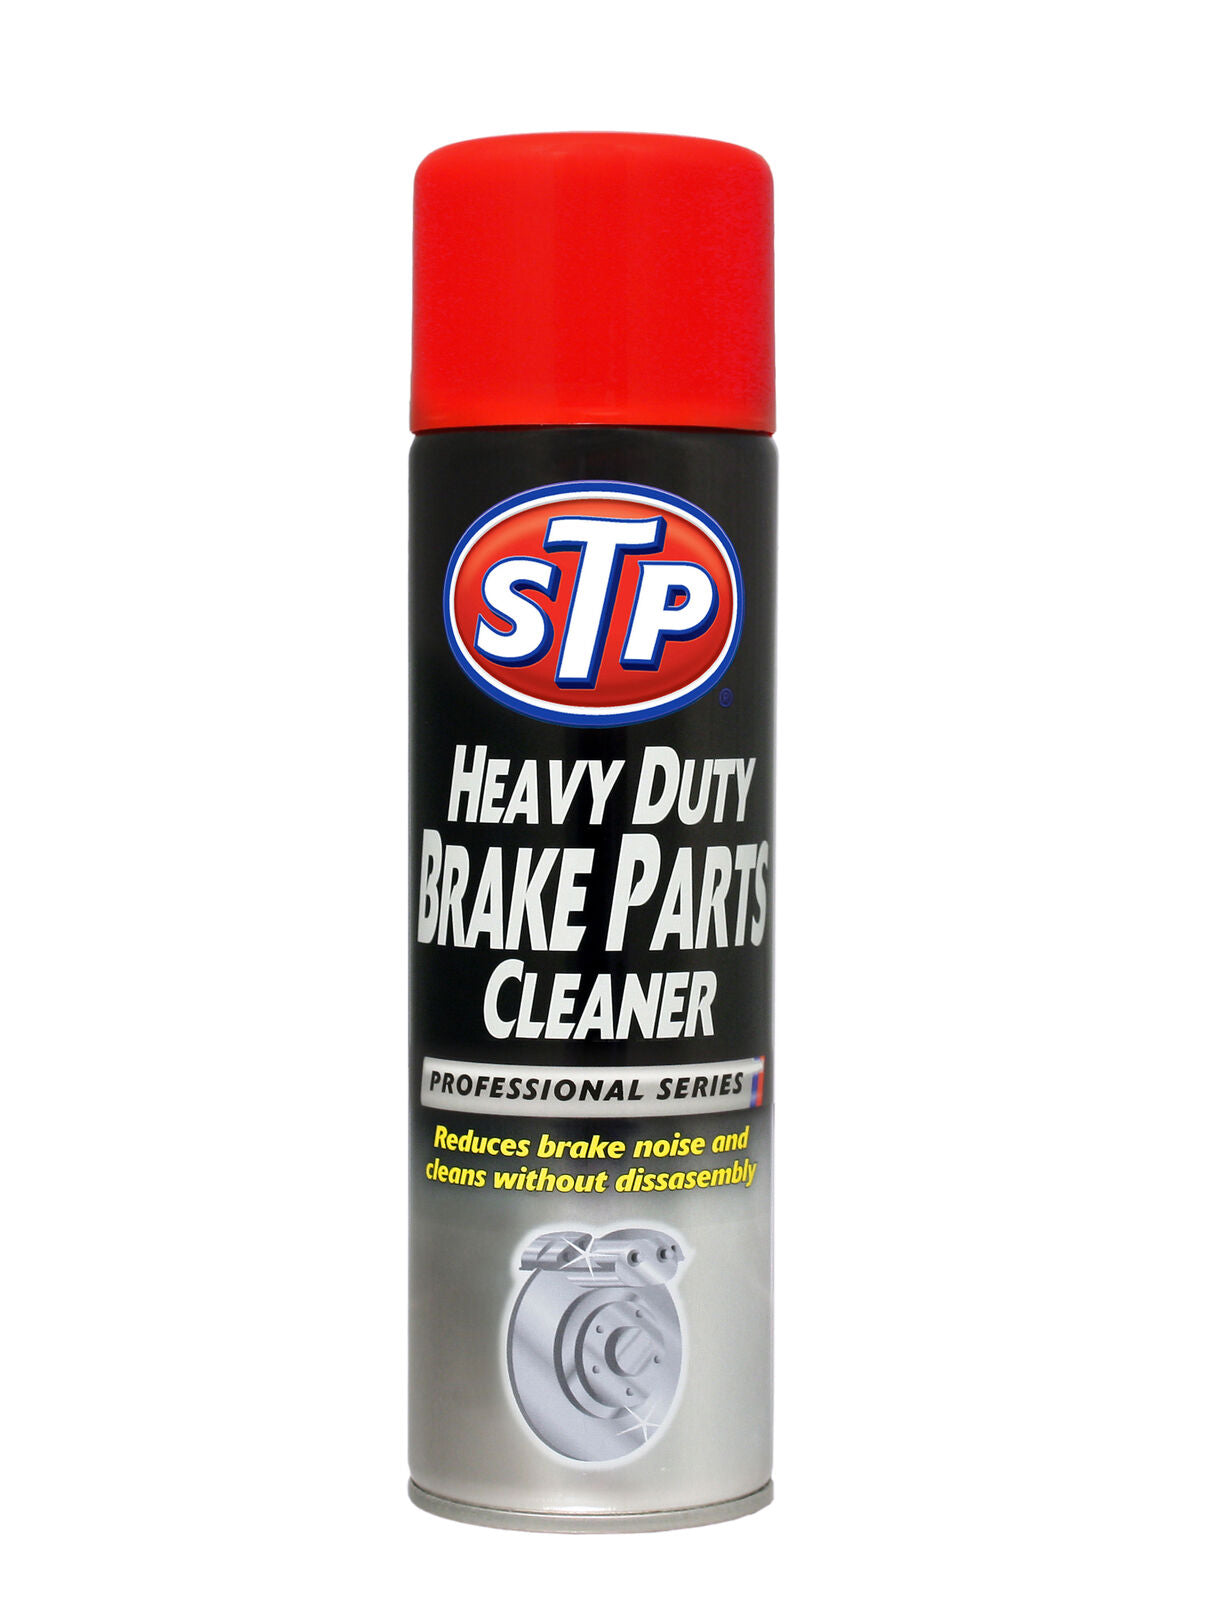 STP Professional Heavy Duty Brake Parts Cleaner 500ml